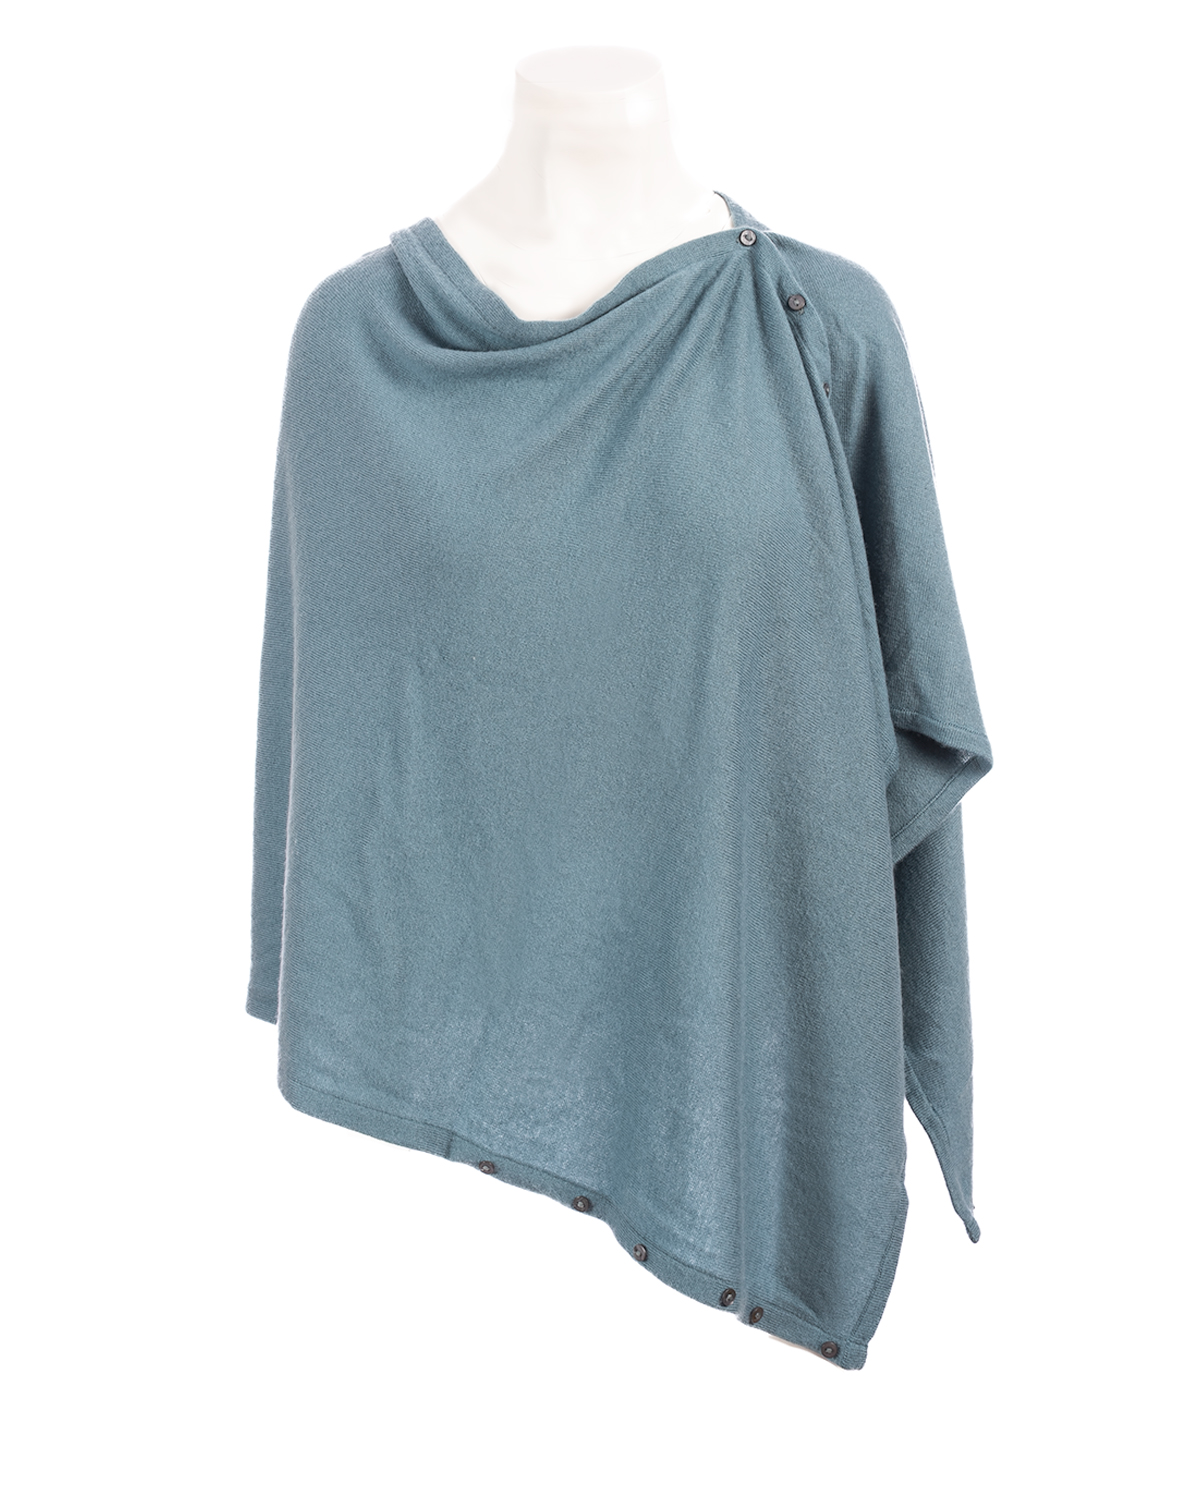 Cashmere Buttoned Poncho Wrap - Teal Blue